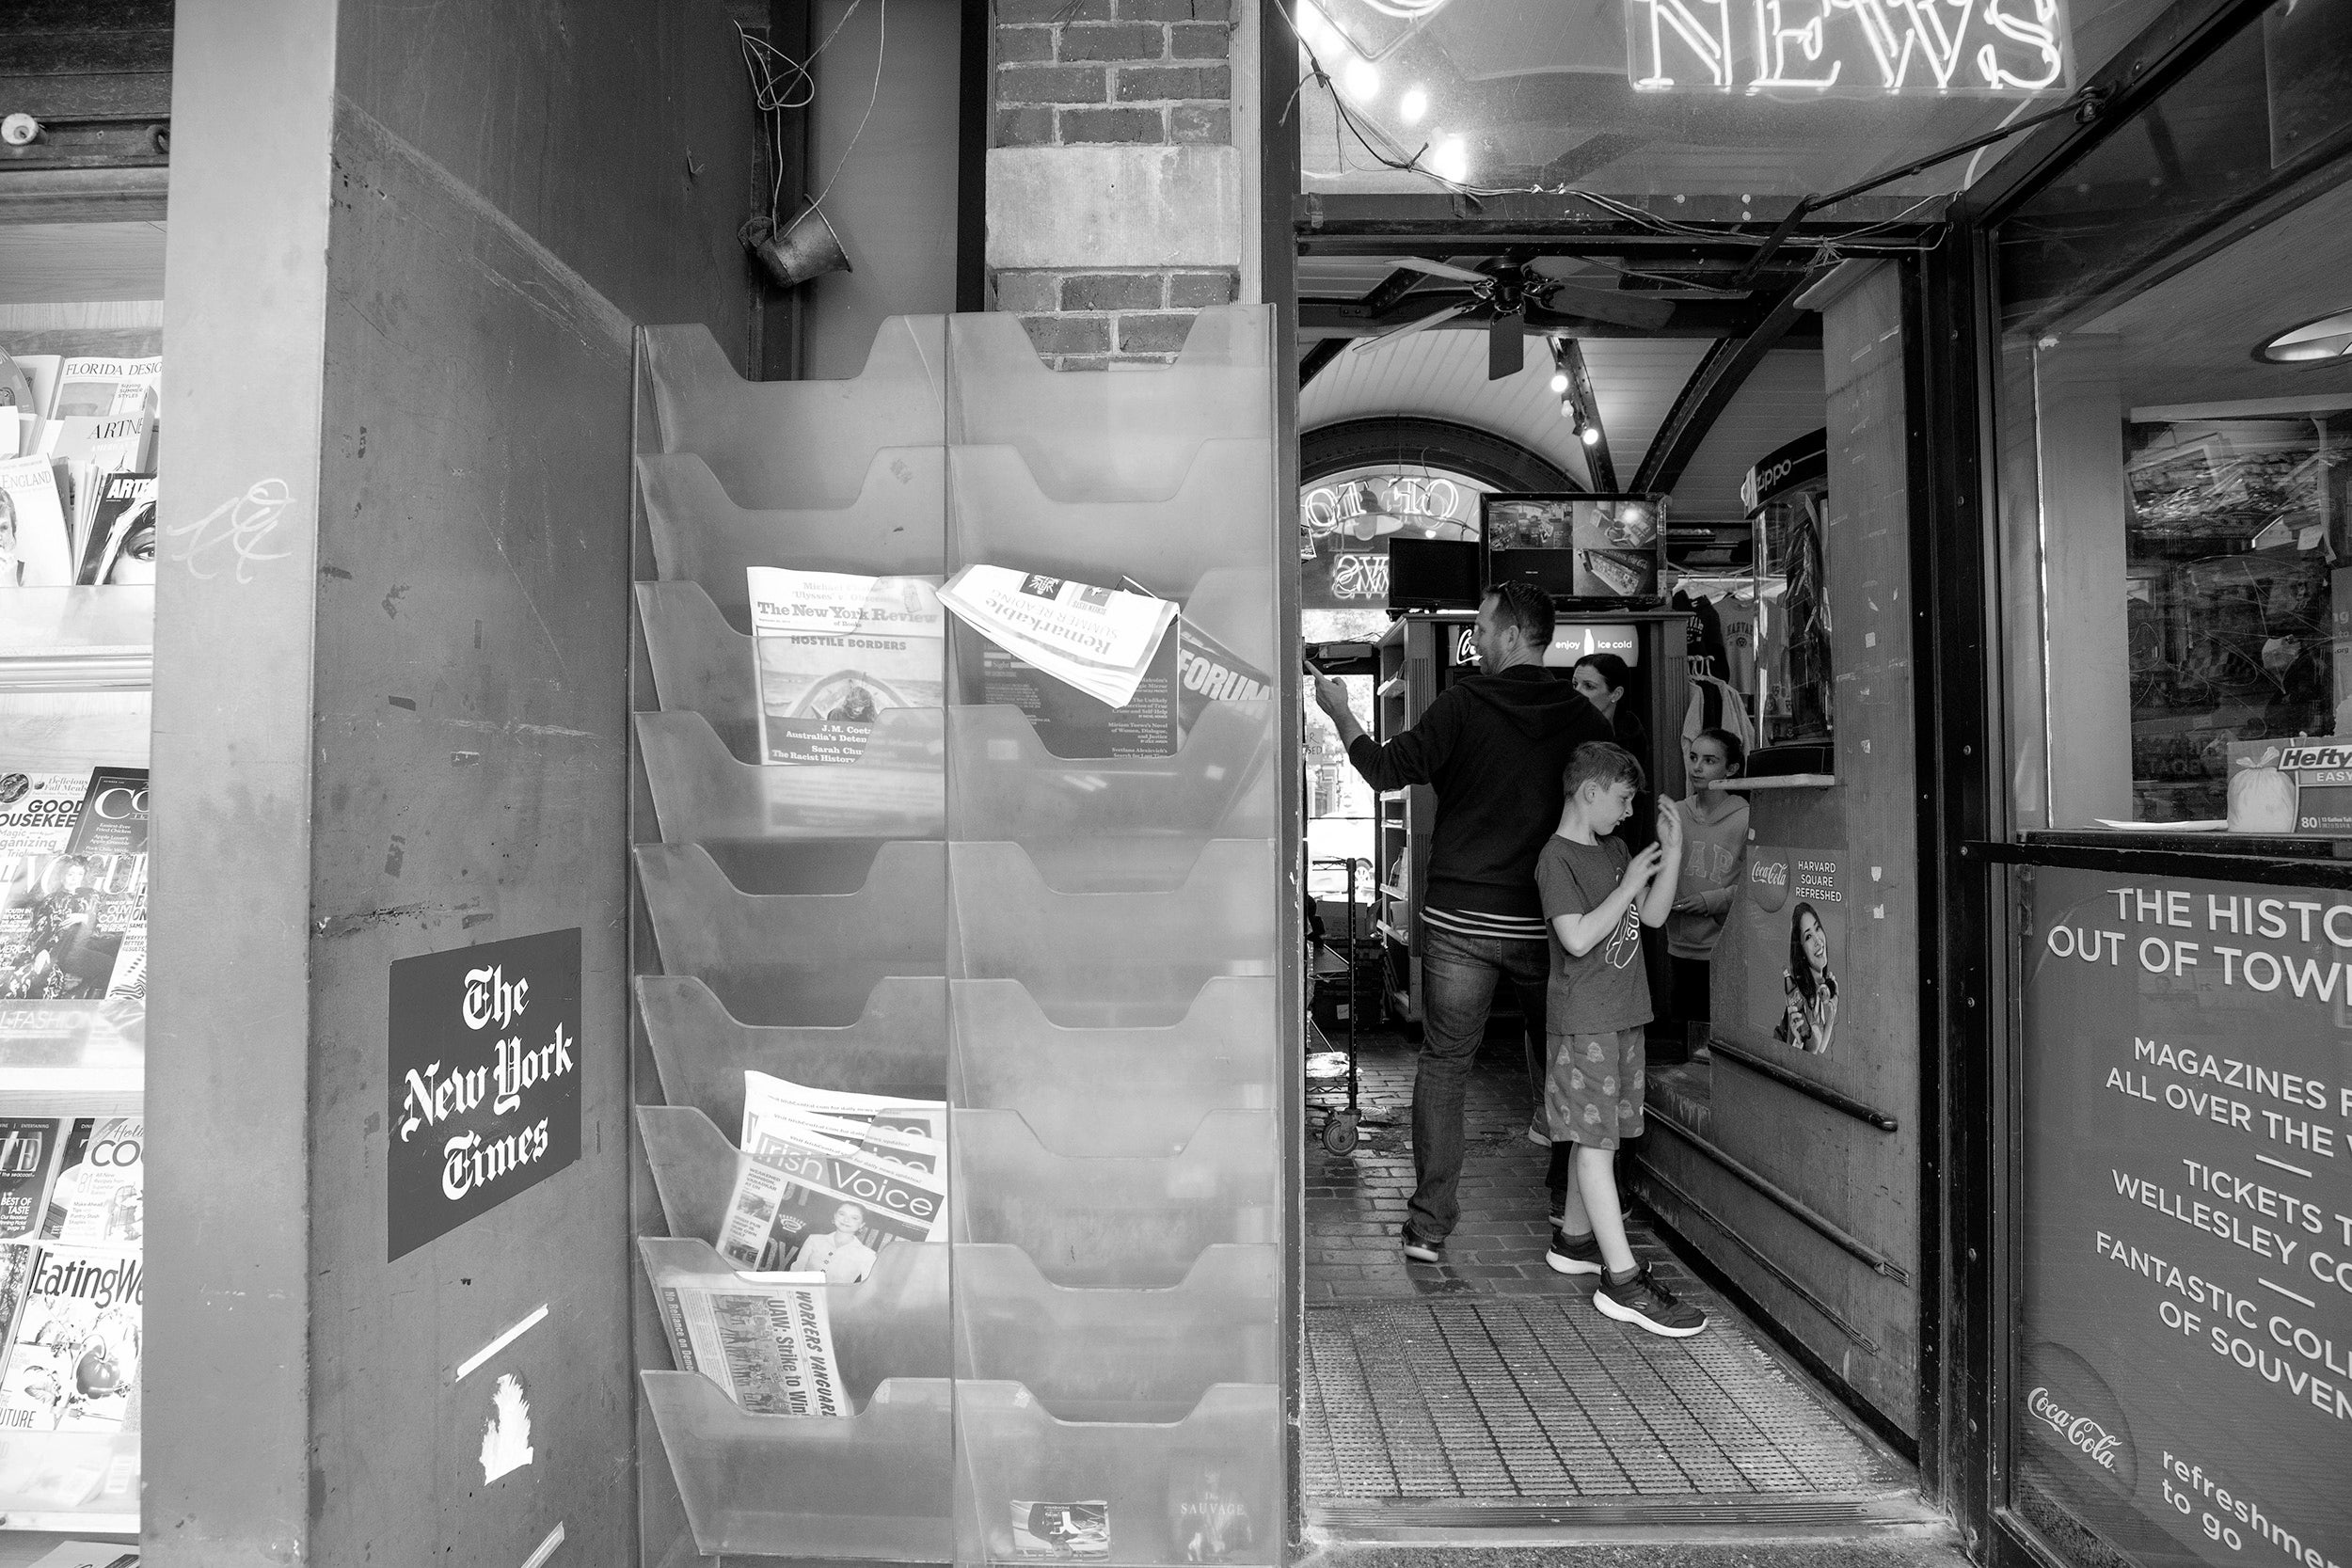 Looking inside the newsstand.